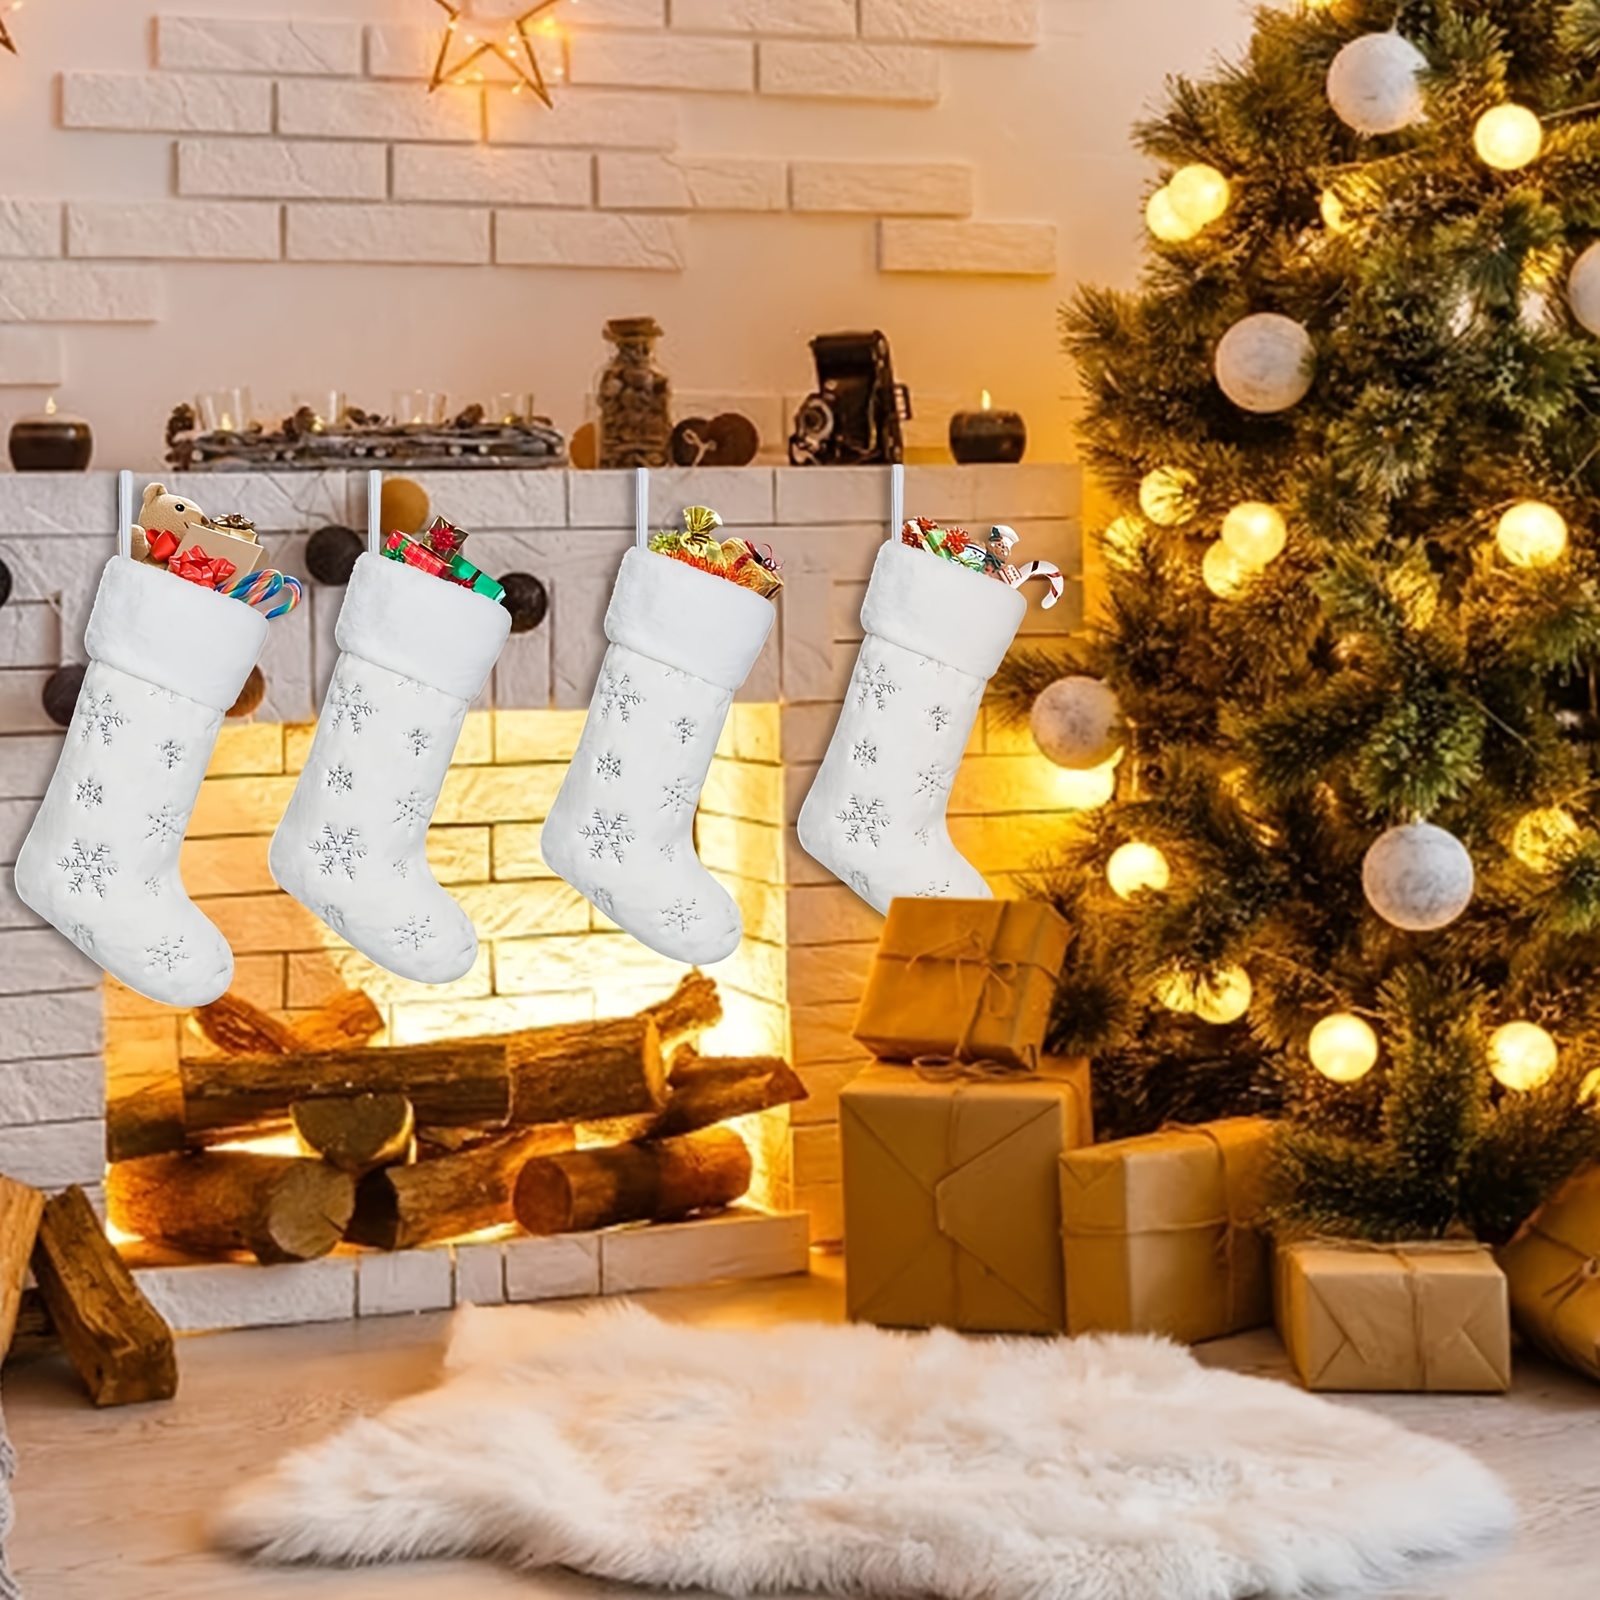 4pcs christmas stockings 20 inch cream white faux fur xmas stockings with silver sequin snowflakes super soft thick plush xmas stockings for christmas decoration holiday decor